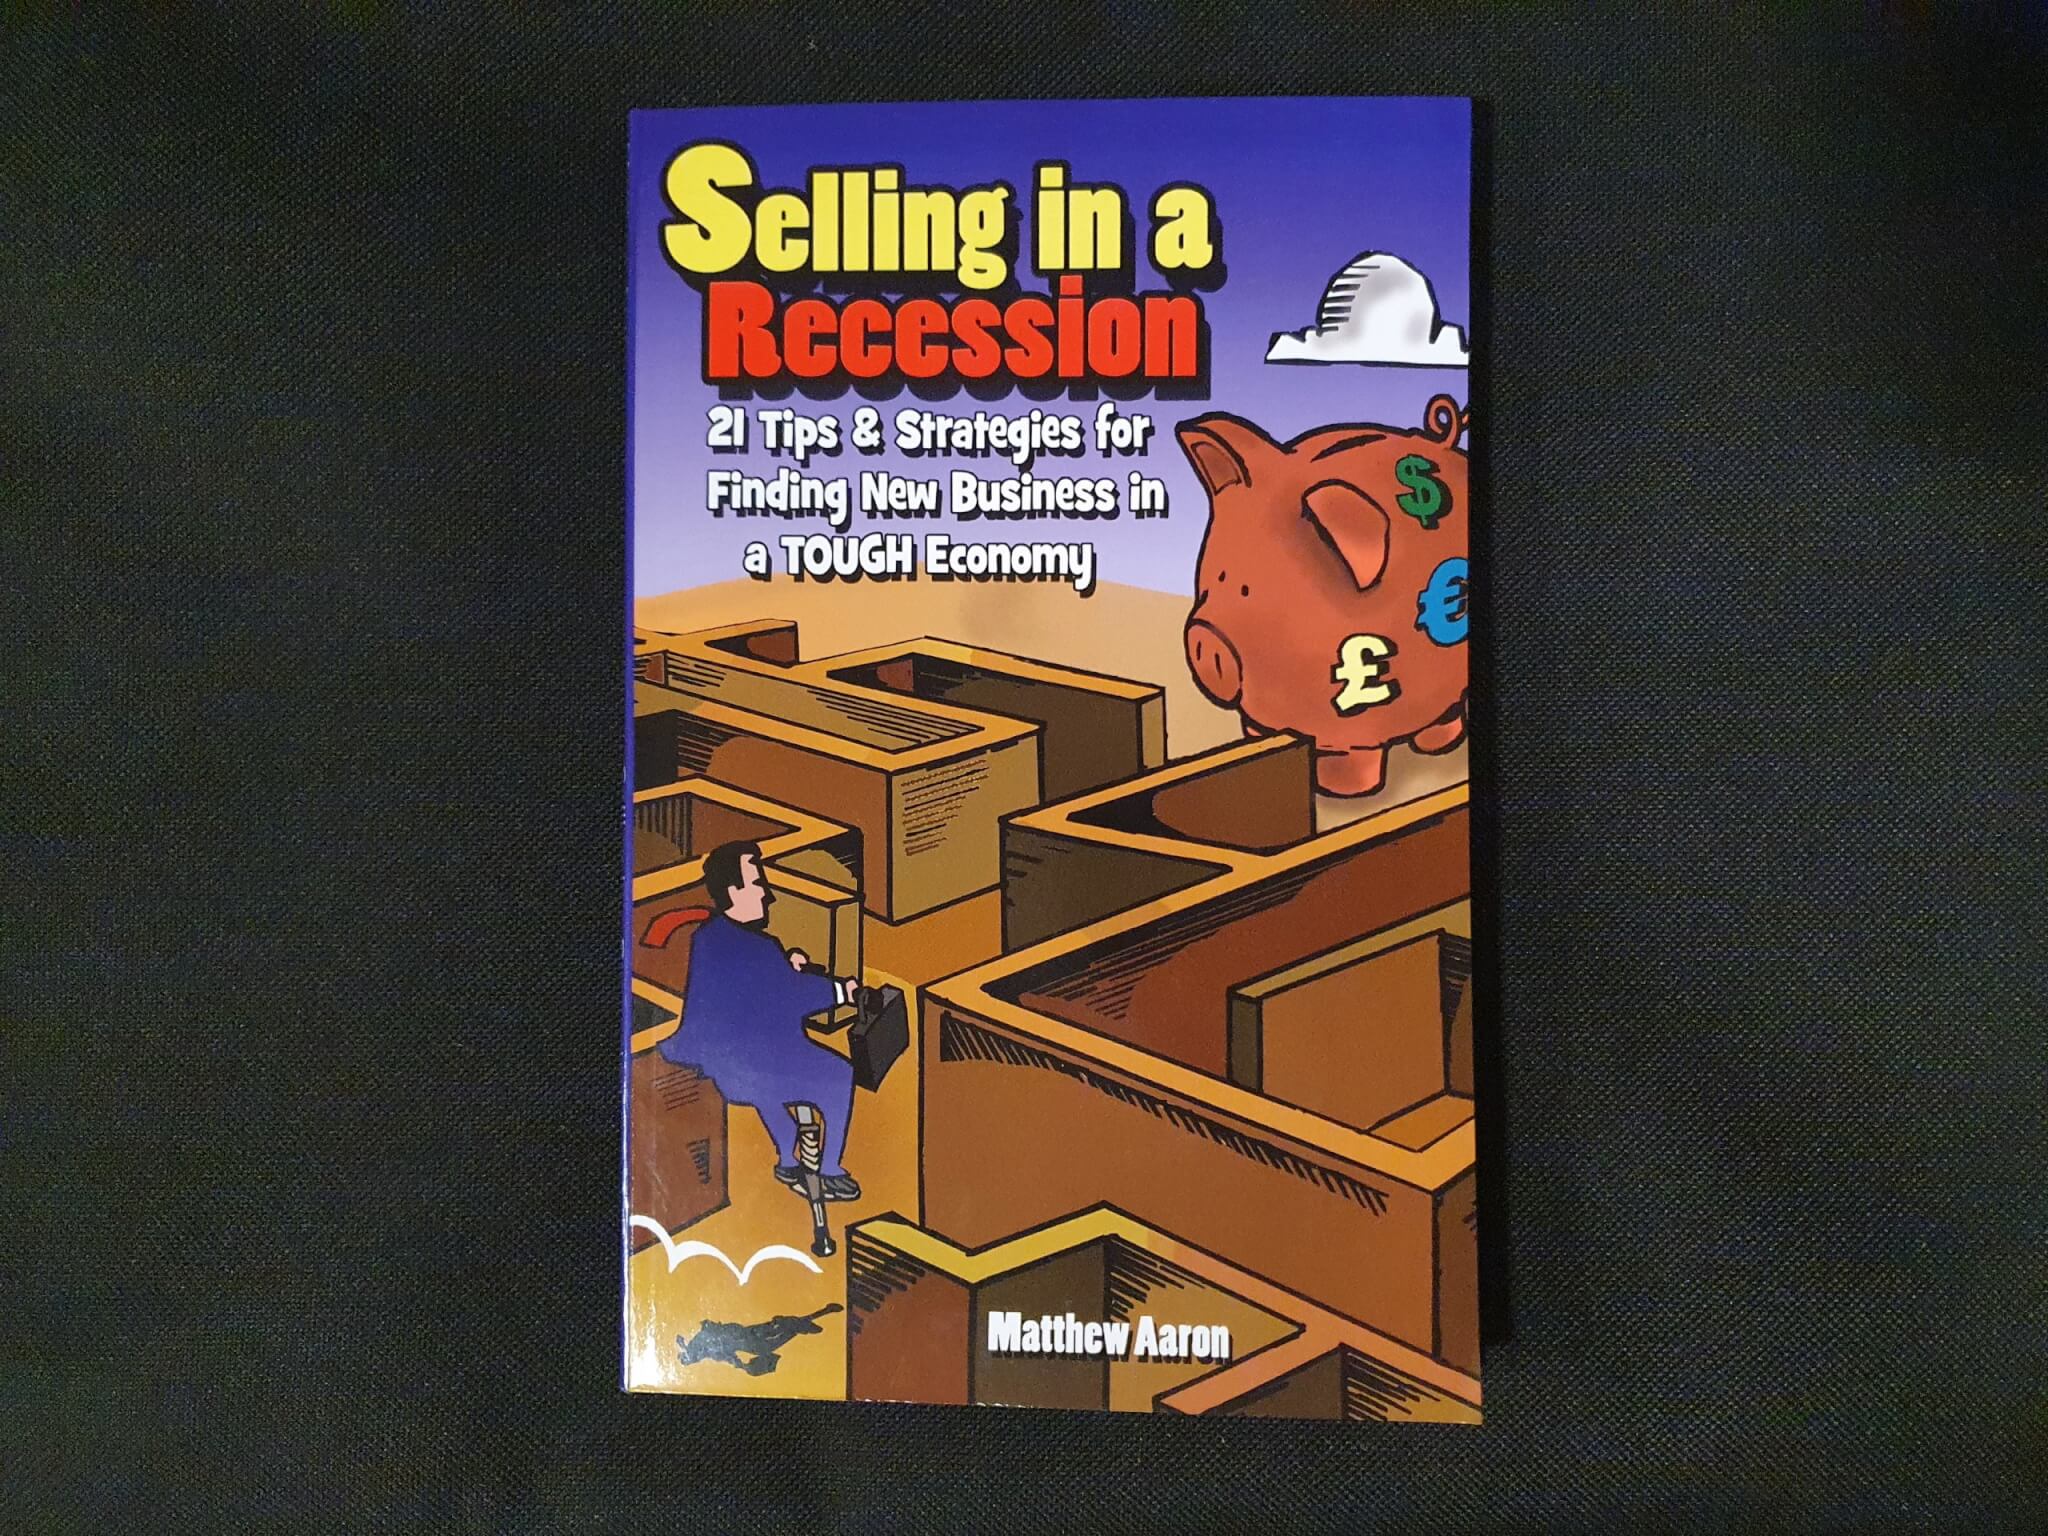 Magnify Consulting - Selling in a Recession